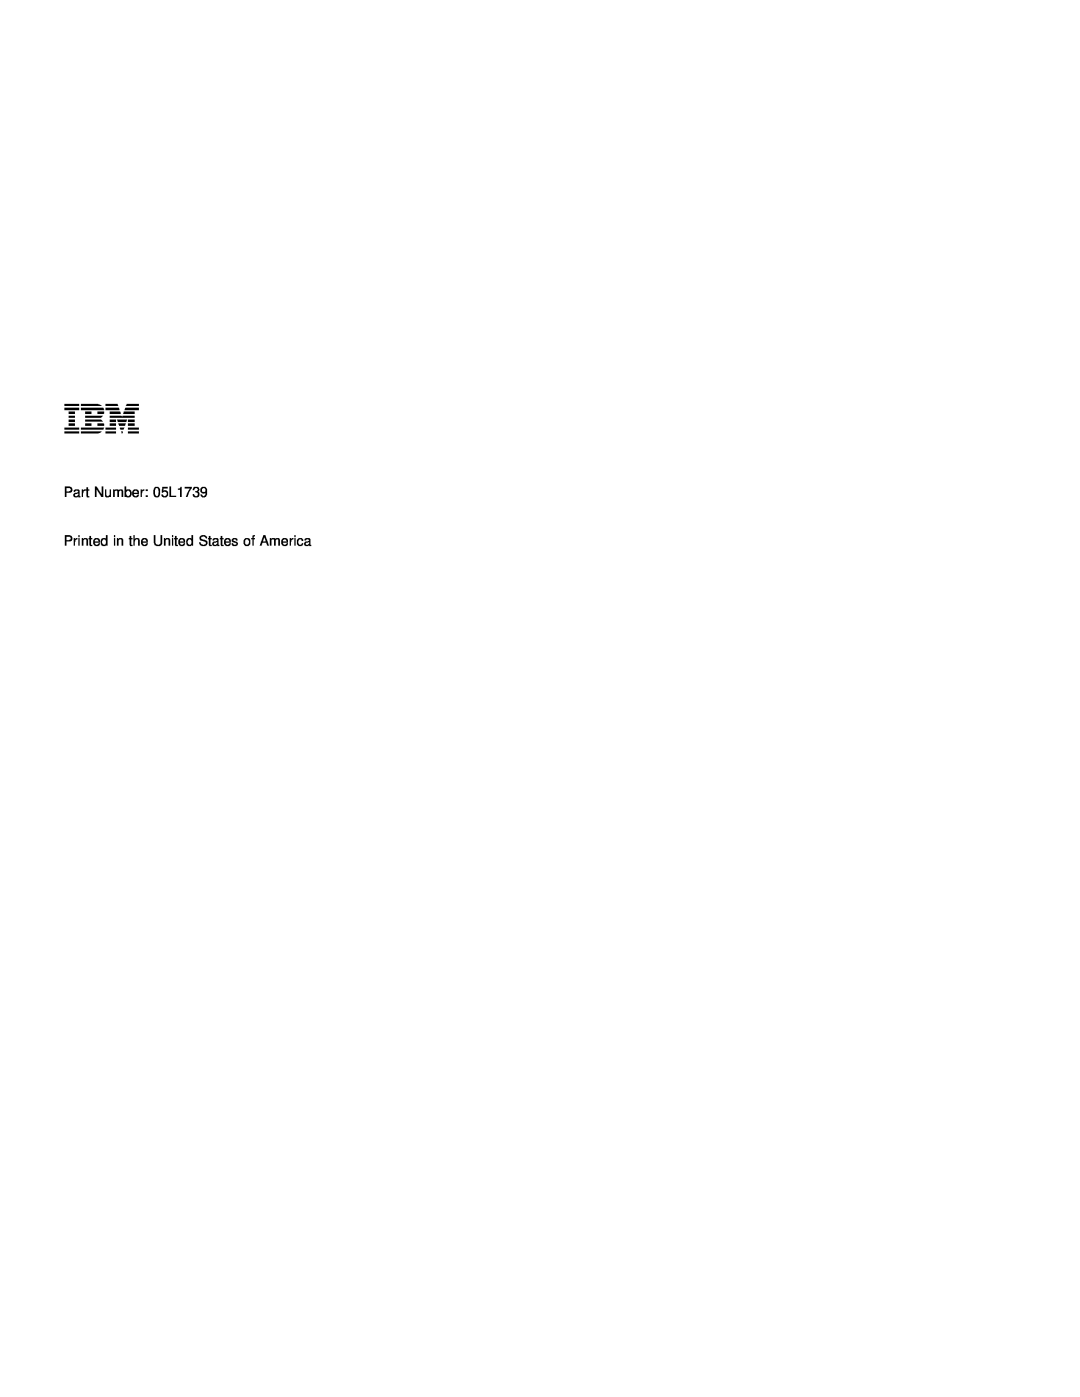 IBM 770 manual Part Number 05L1739 Printed in the United States of America 